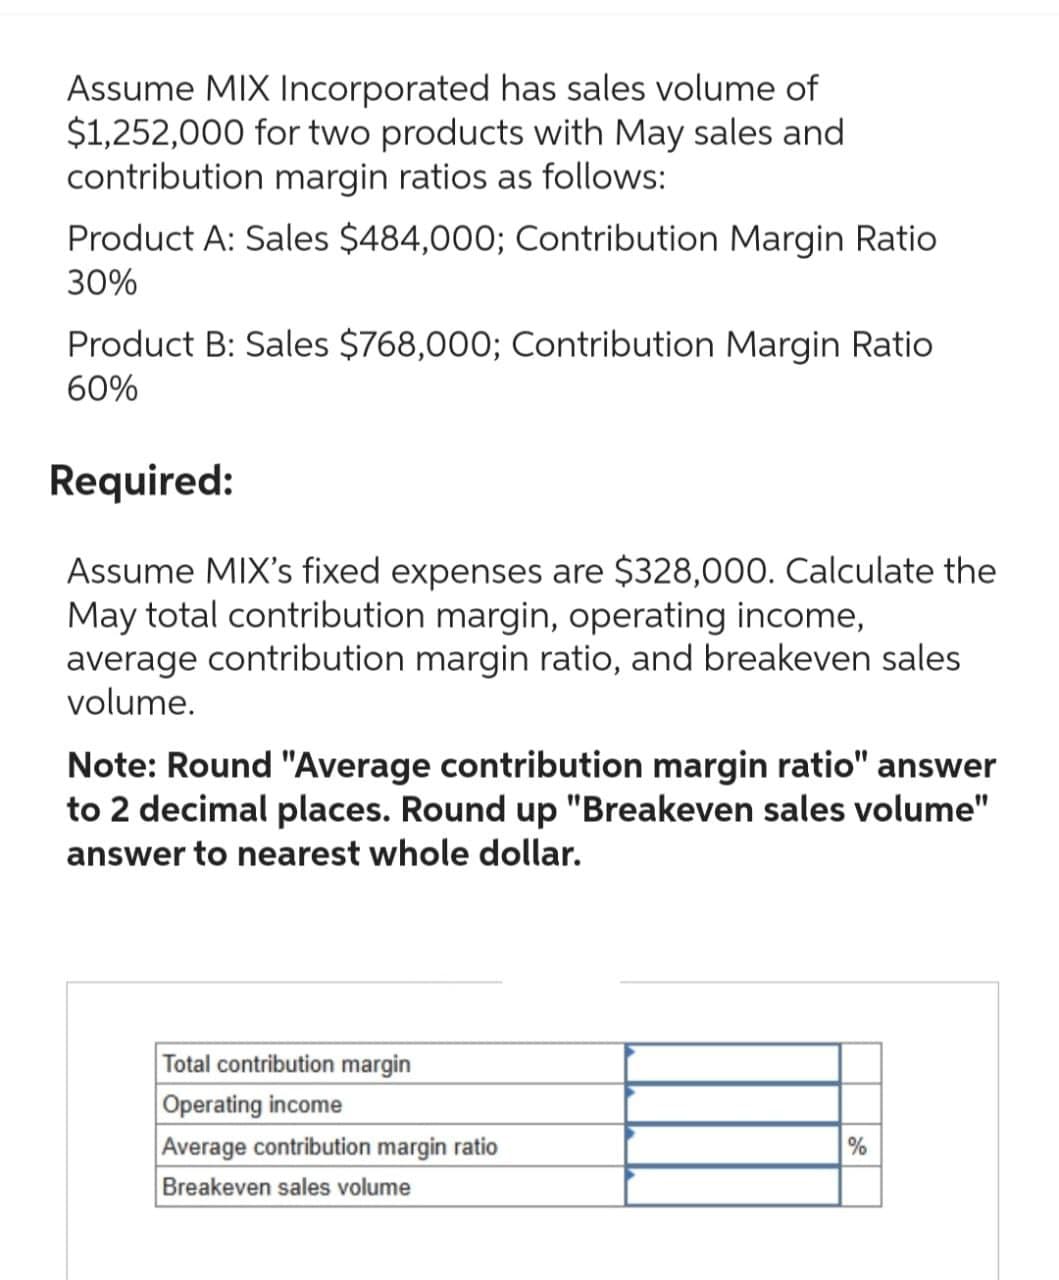 Assume MIX Incorporated has sales volume of
$1,252,000 for two products with May sales and
contribution margin ratios as follows:
Product A: Sales $484,000; Contribution Margin Ratio
30%
Product B: Sales $768,000; Contribution Margin Ratio
60%
Required:
Assume MIX's fixed expenses are $328,000. Calculate the
May total contribution margin, operating income,
average contribution margin ratio, and breakeven sales
volume.
Note: Round "Average contribution margin ratio" answer
to 2 decimal places. Round up "Breakeven sales volume"
answer to nearest whole dollar.
Total contribution margin
Operating income
Average contribution margin ratio
Breakeven sales volume
%